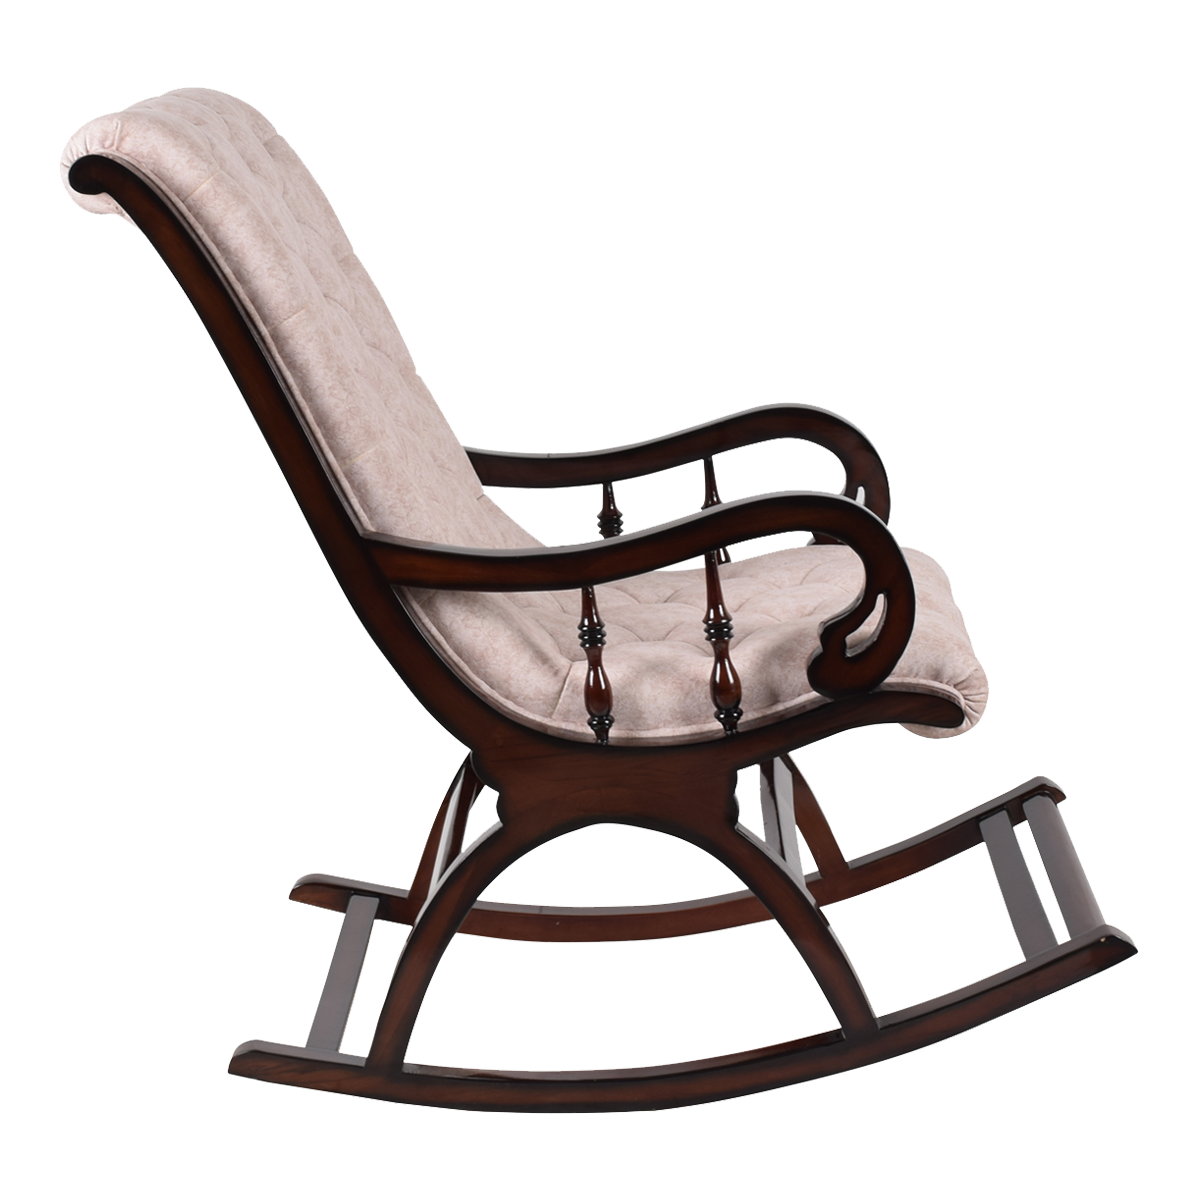 Touffy Fabric Upholstered Teak Wood Rocking Chair (Brown Ivory)